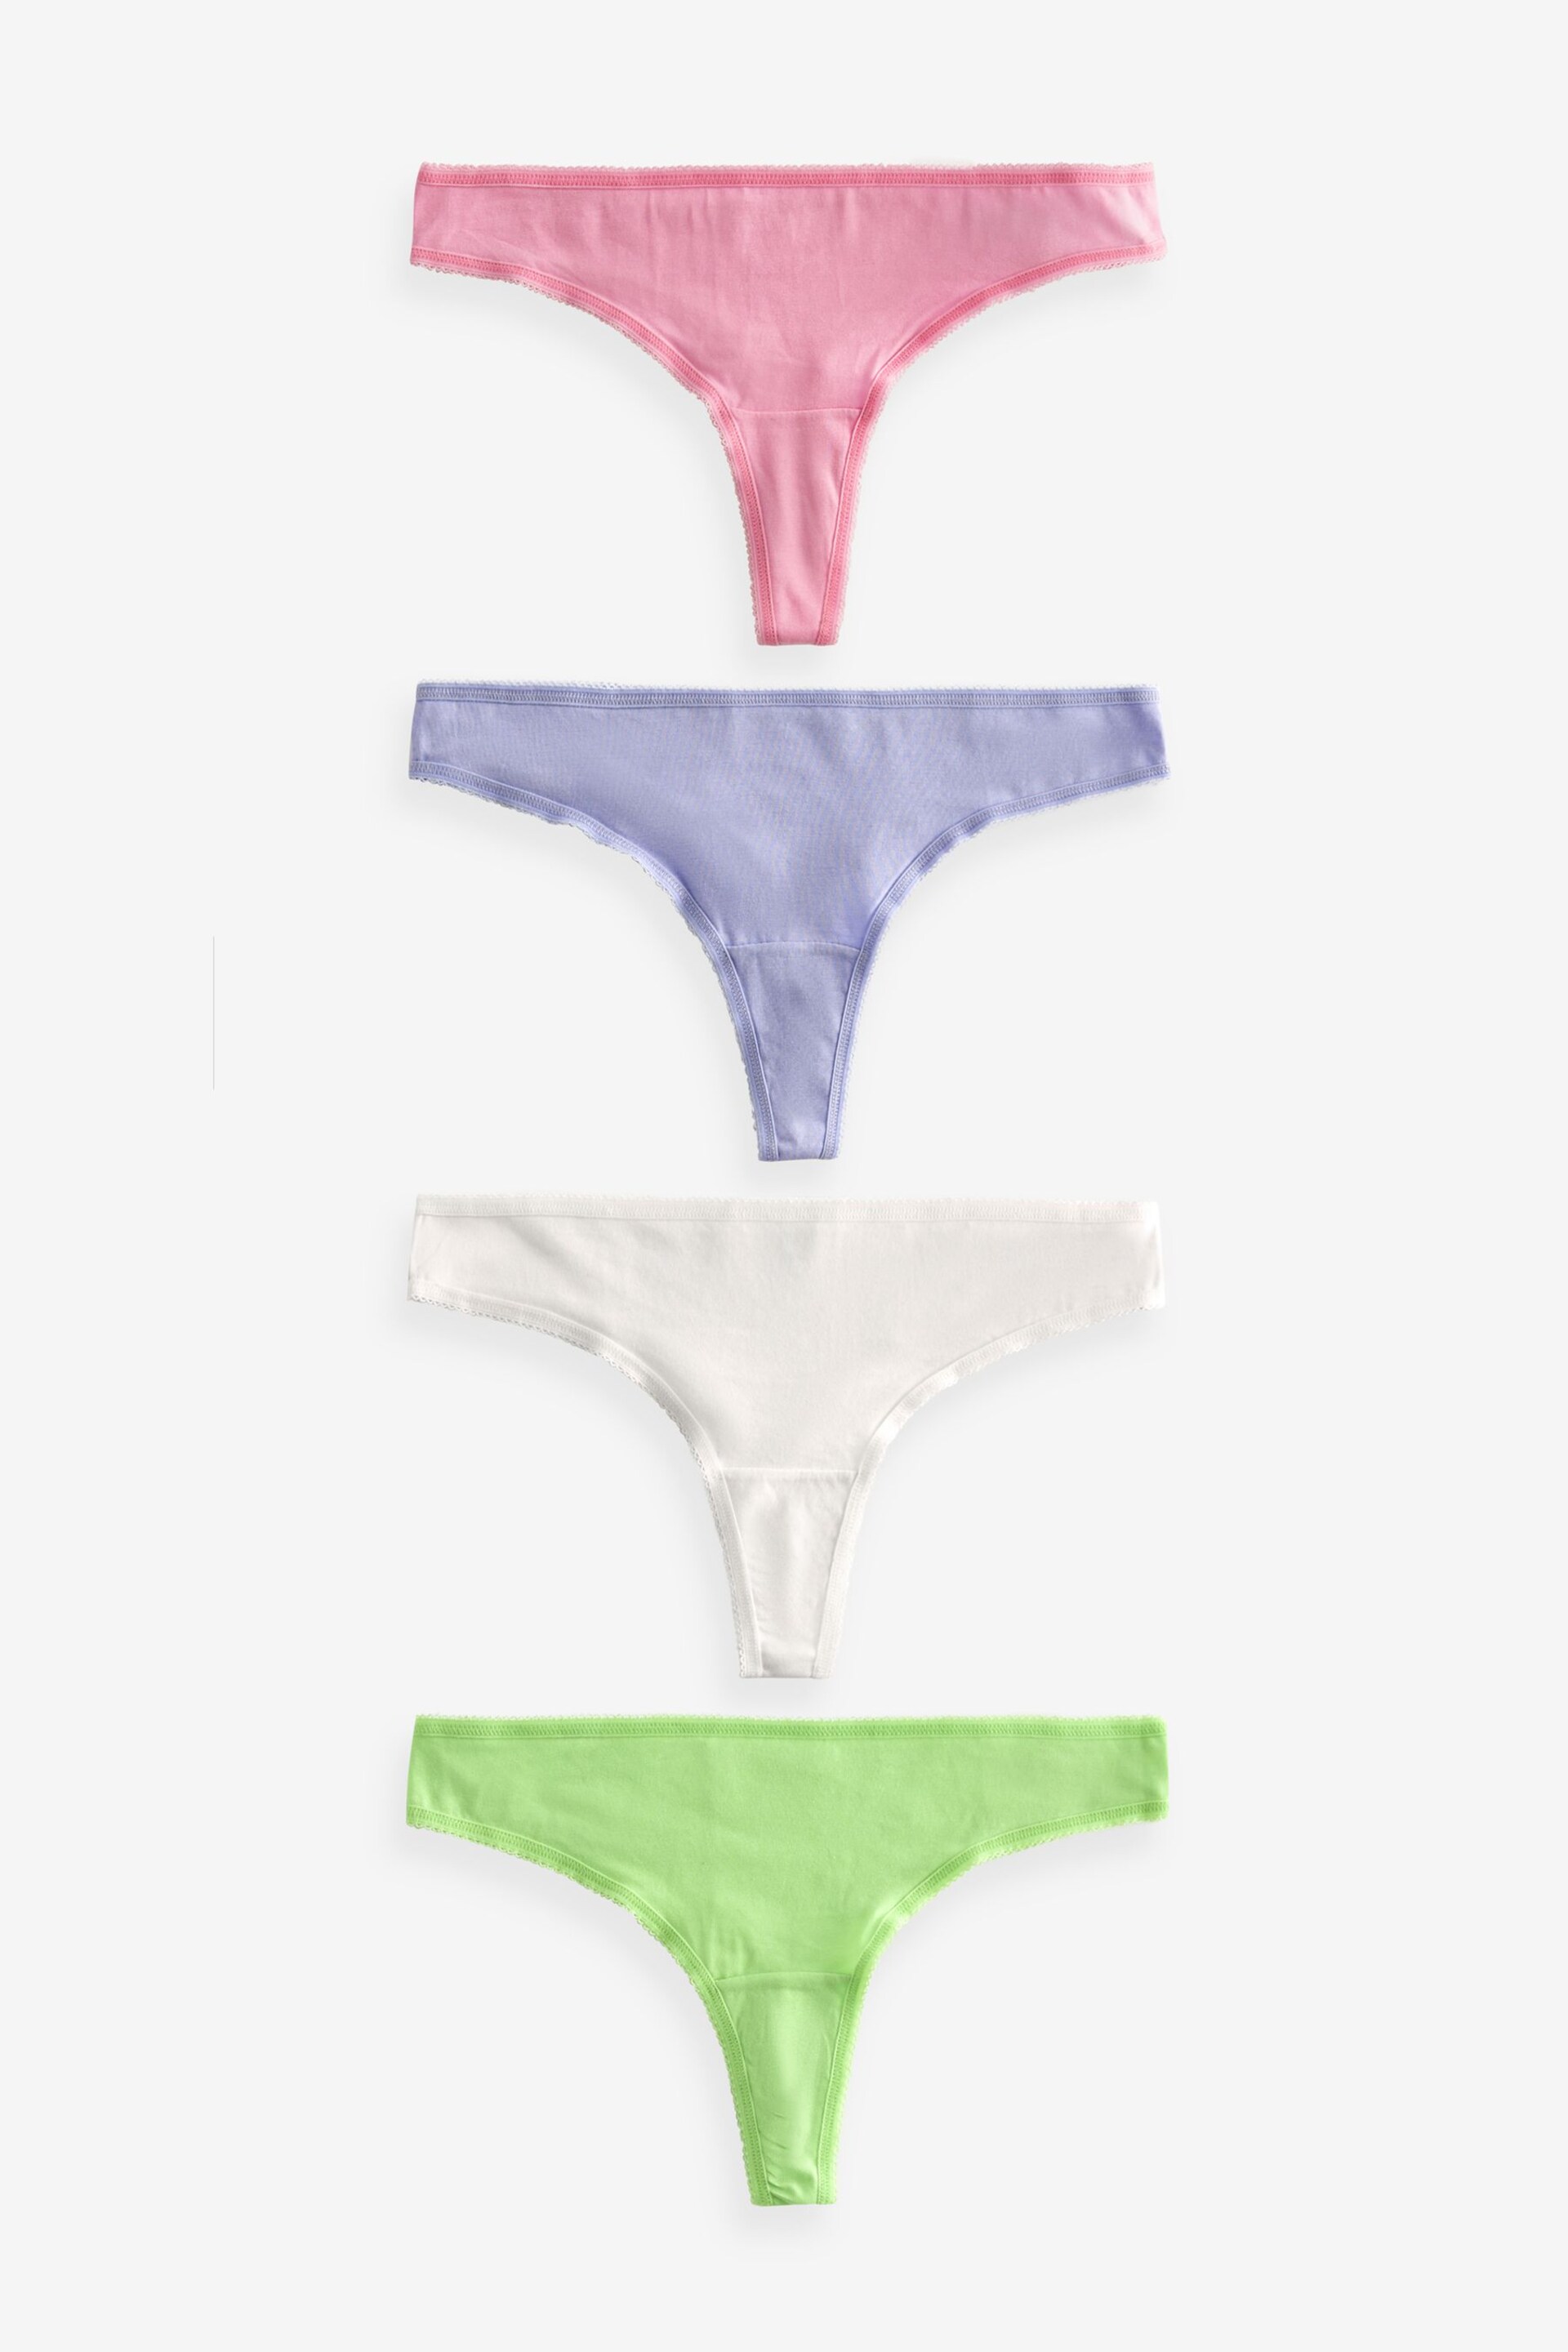 Pink/Lilac/Green/White Thong Cotton Rich Knickers 4 Pack - Image 1 of 8